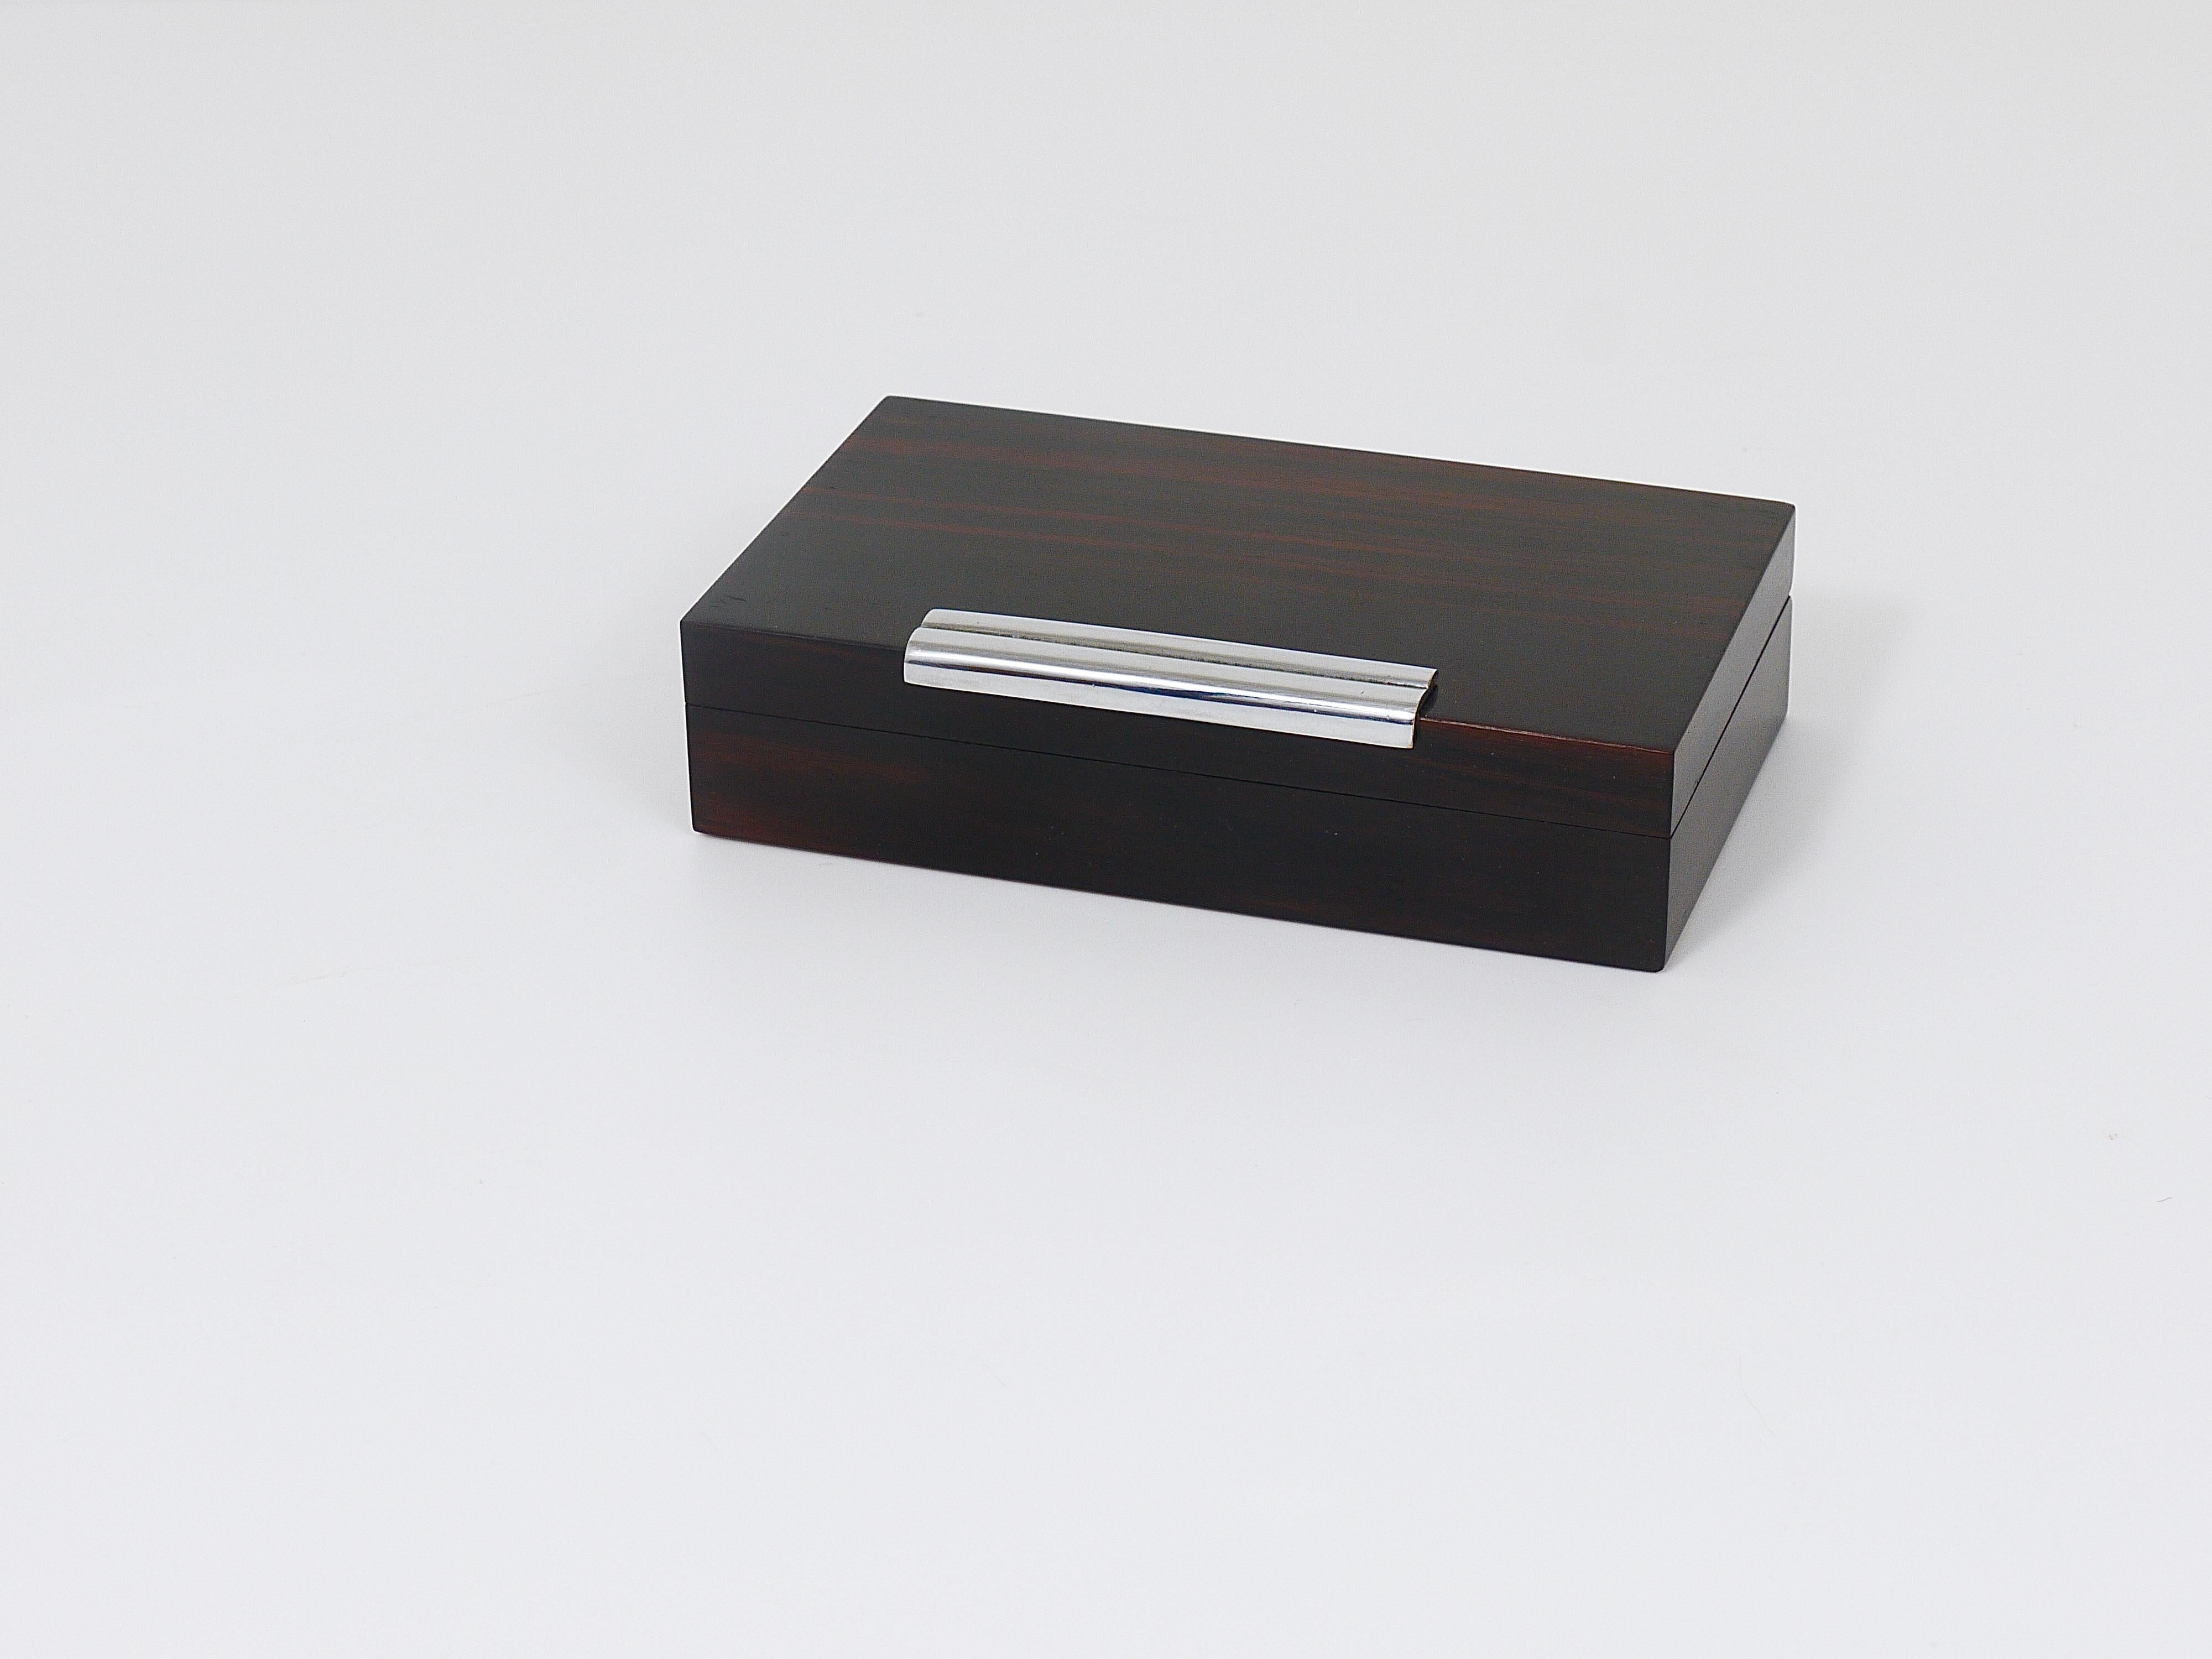 French Art Deco Rosewood & Nickel Storage Box, Maison Desny Style, France, 1930s For Sale 10